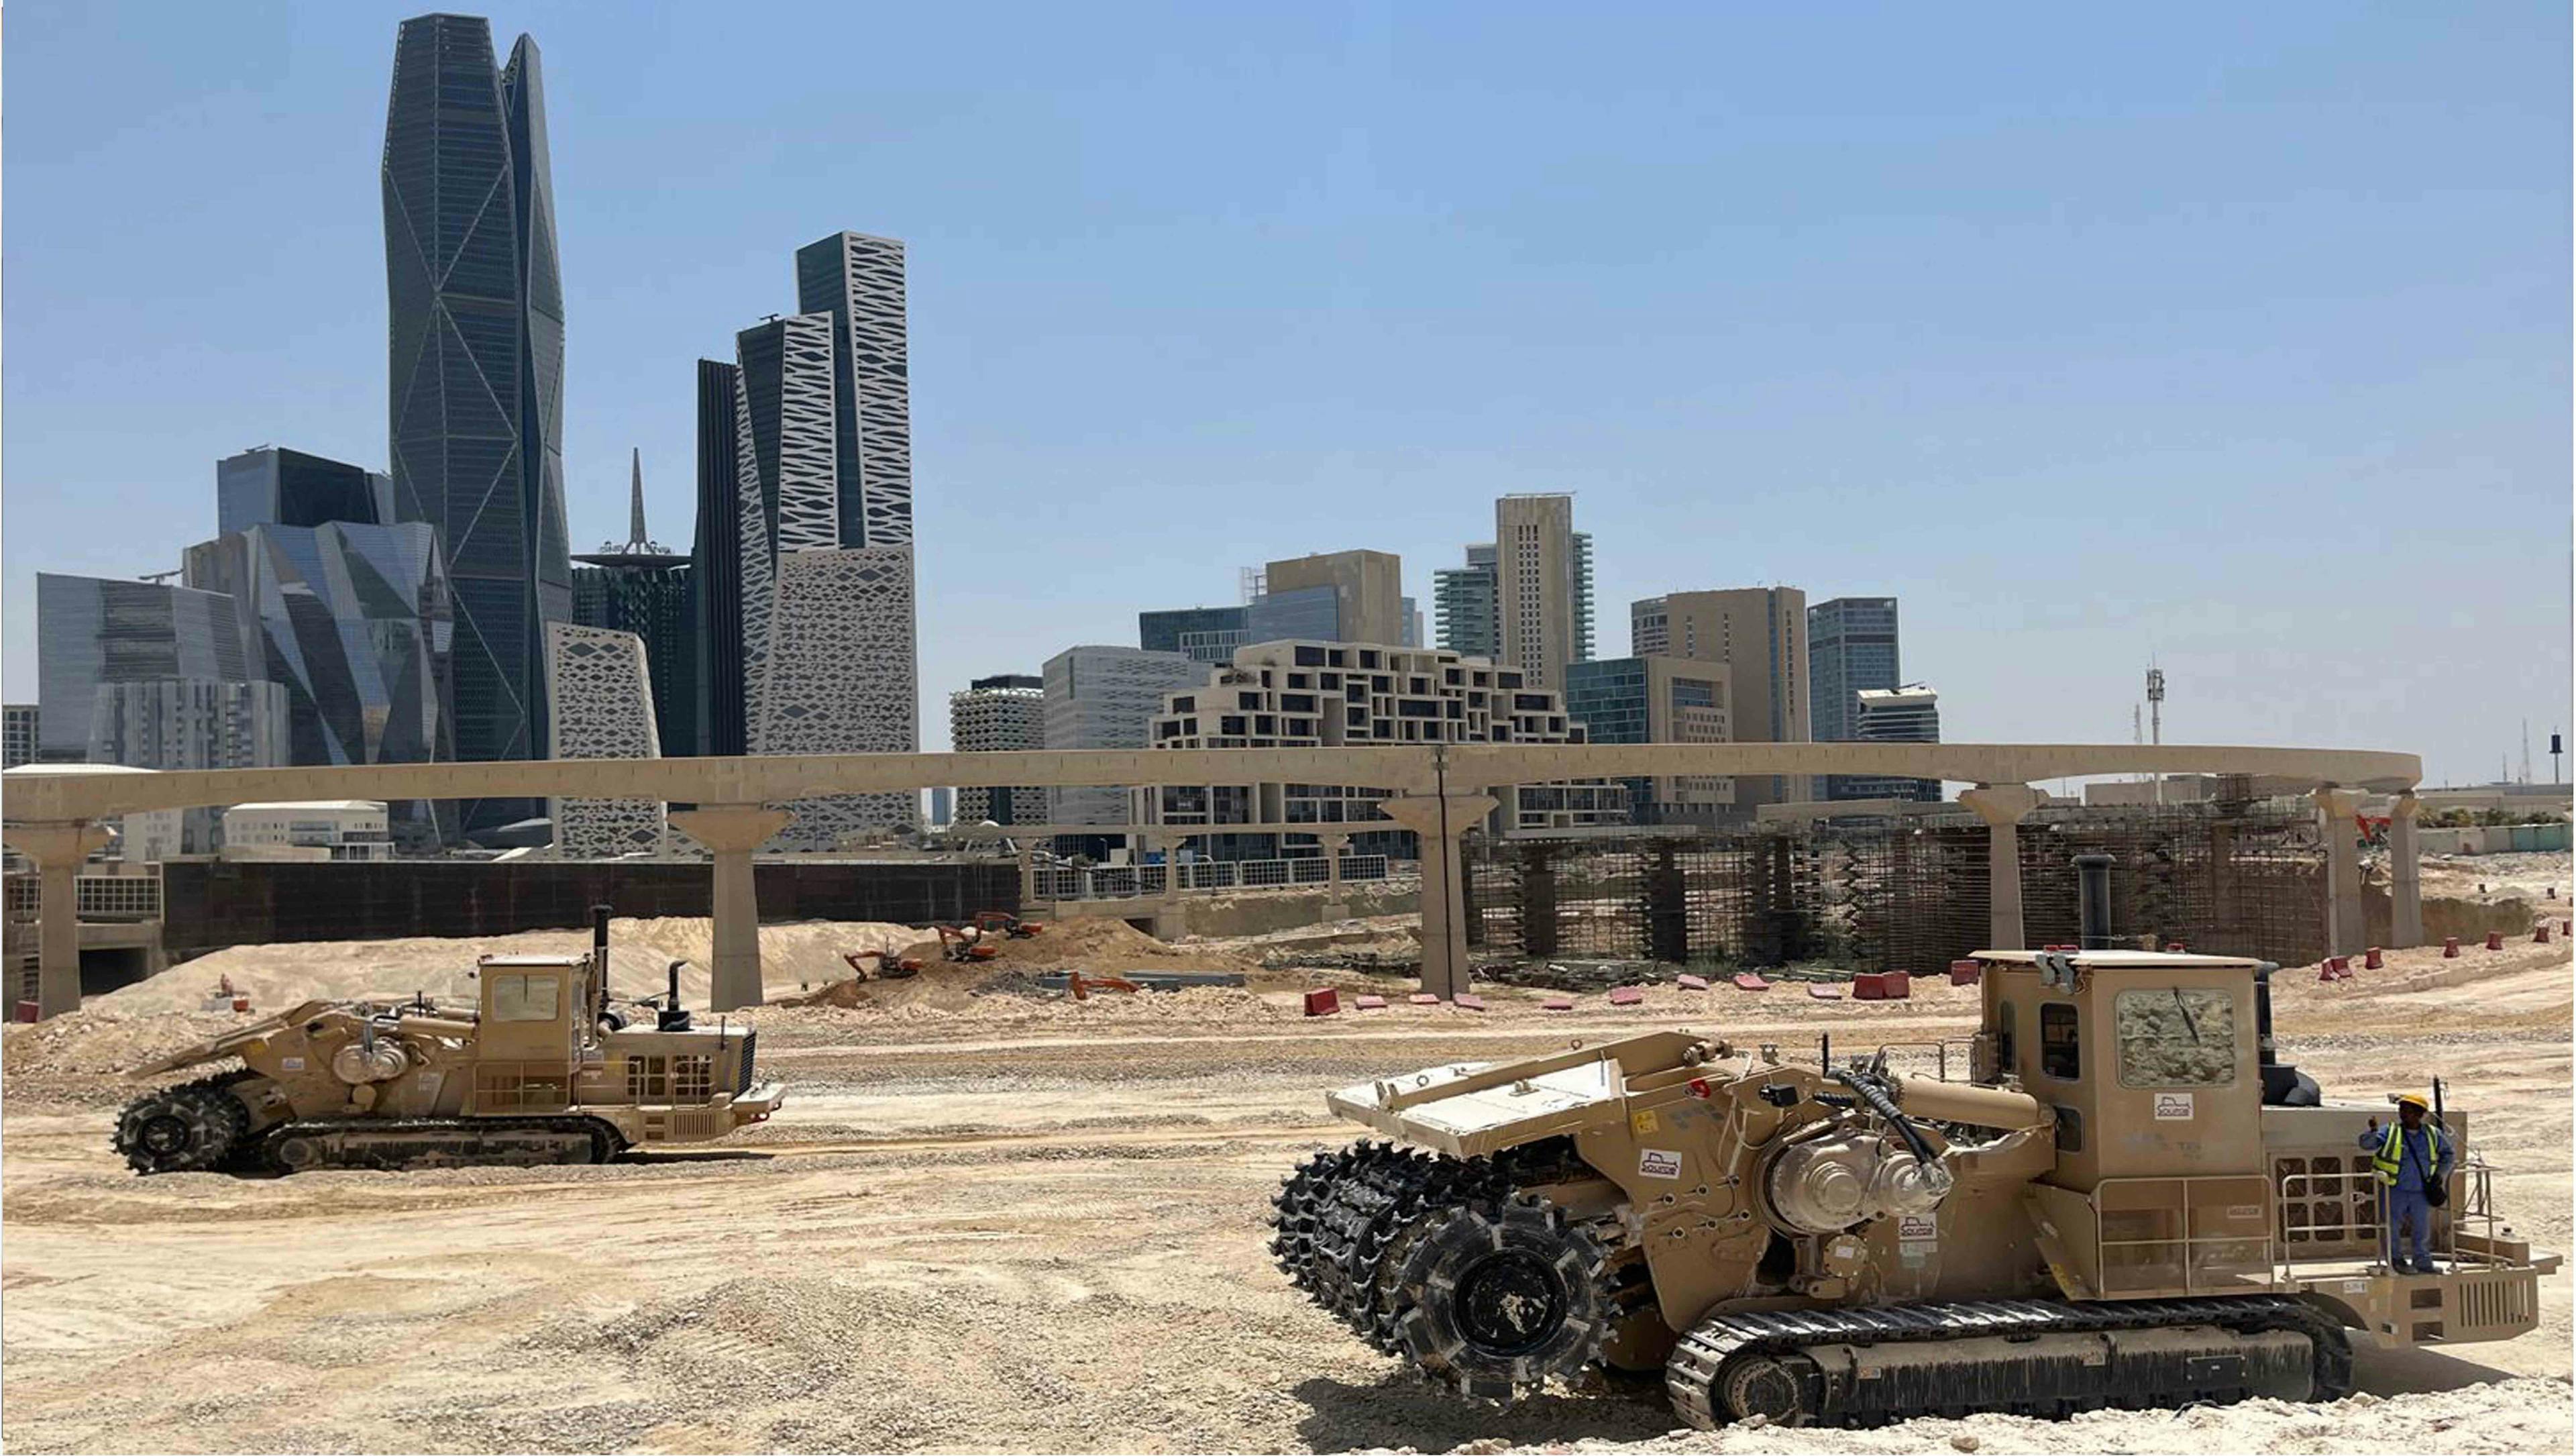 Excavation and road works in the King Abdullah Financial Centerimage